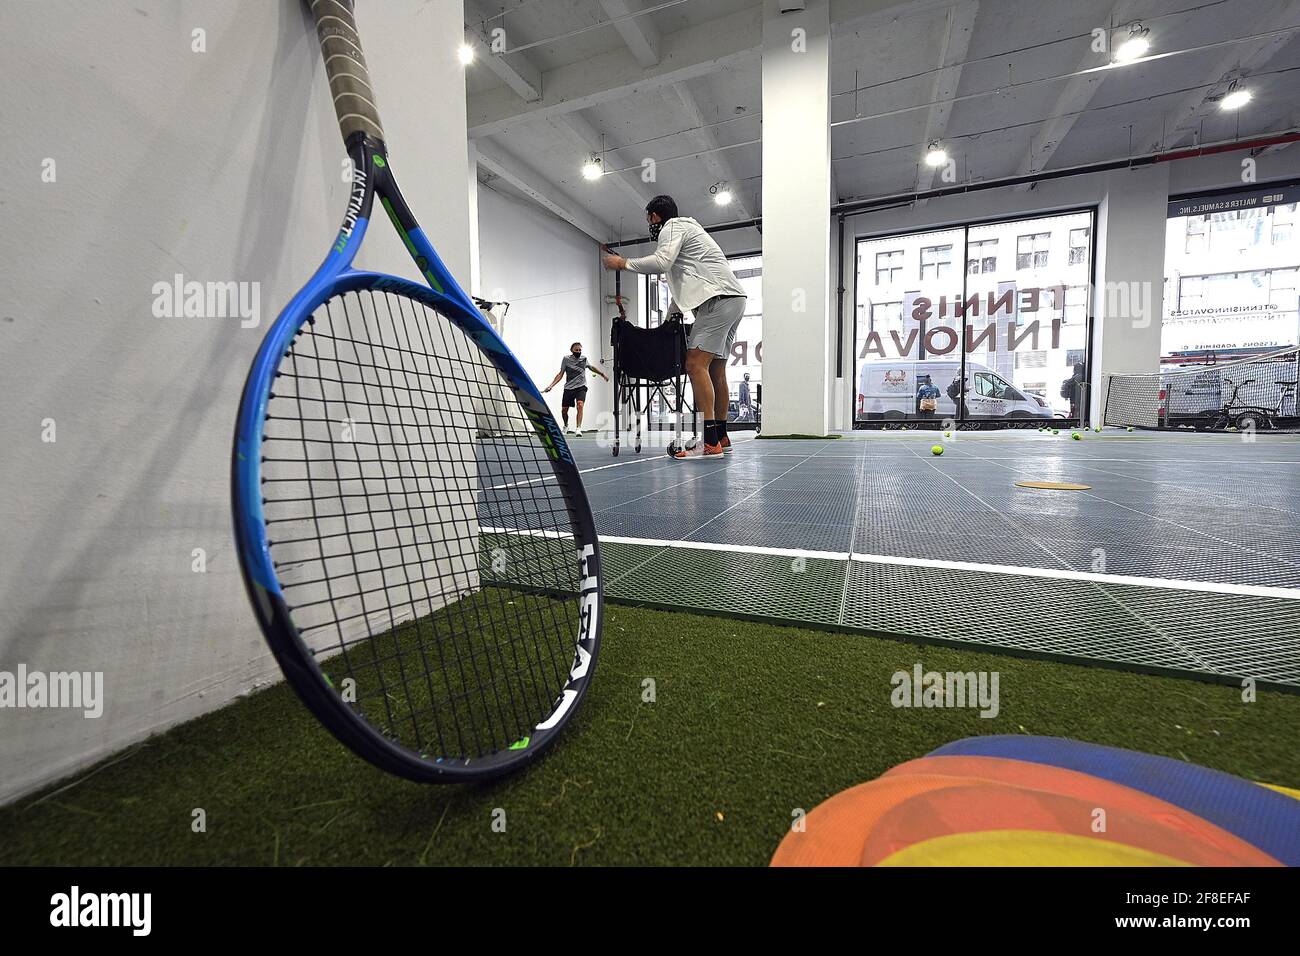 People participate in tennis lessons at the Tennis Innovator courts located on 8th Avenue in Midtown Manhattan, New York, NY, April 13, 2021. Equipped with an ION/UV virus killing air ventilation system, the 8,000 square-foot facility offers 4 modified tennis courts with available tennis lessons for adults and children; an “Innovators Move!” program offers time for children to play multiple types of ball games, including basketball, table tennis and tennis, centered around developing strength and coordination. (Photo by Anthony Behar/Sipa USA) Stock Photo